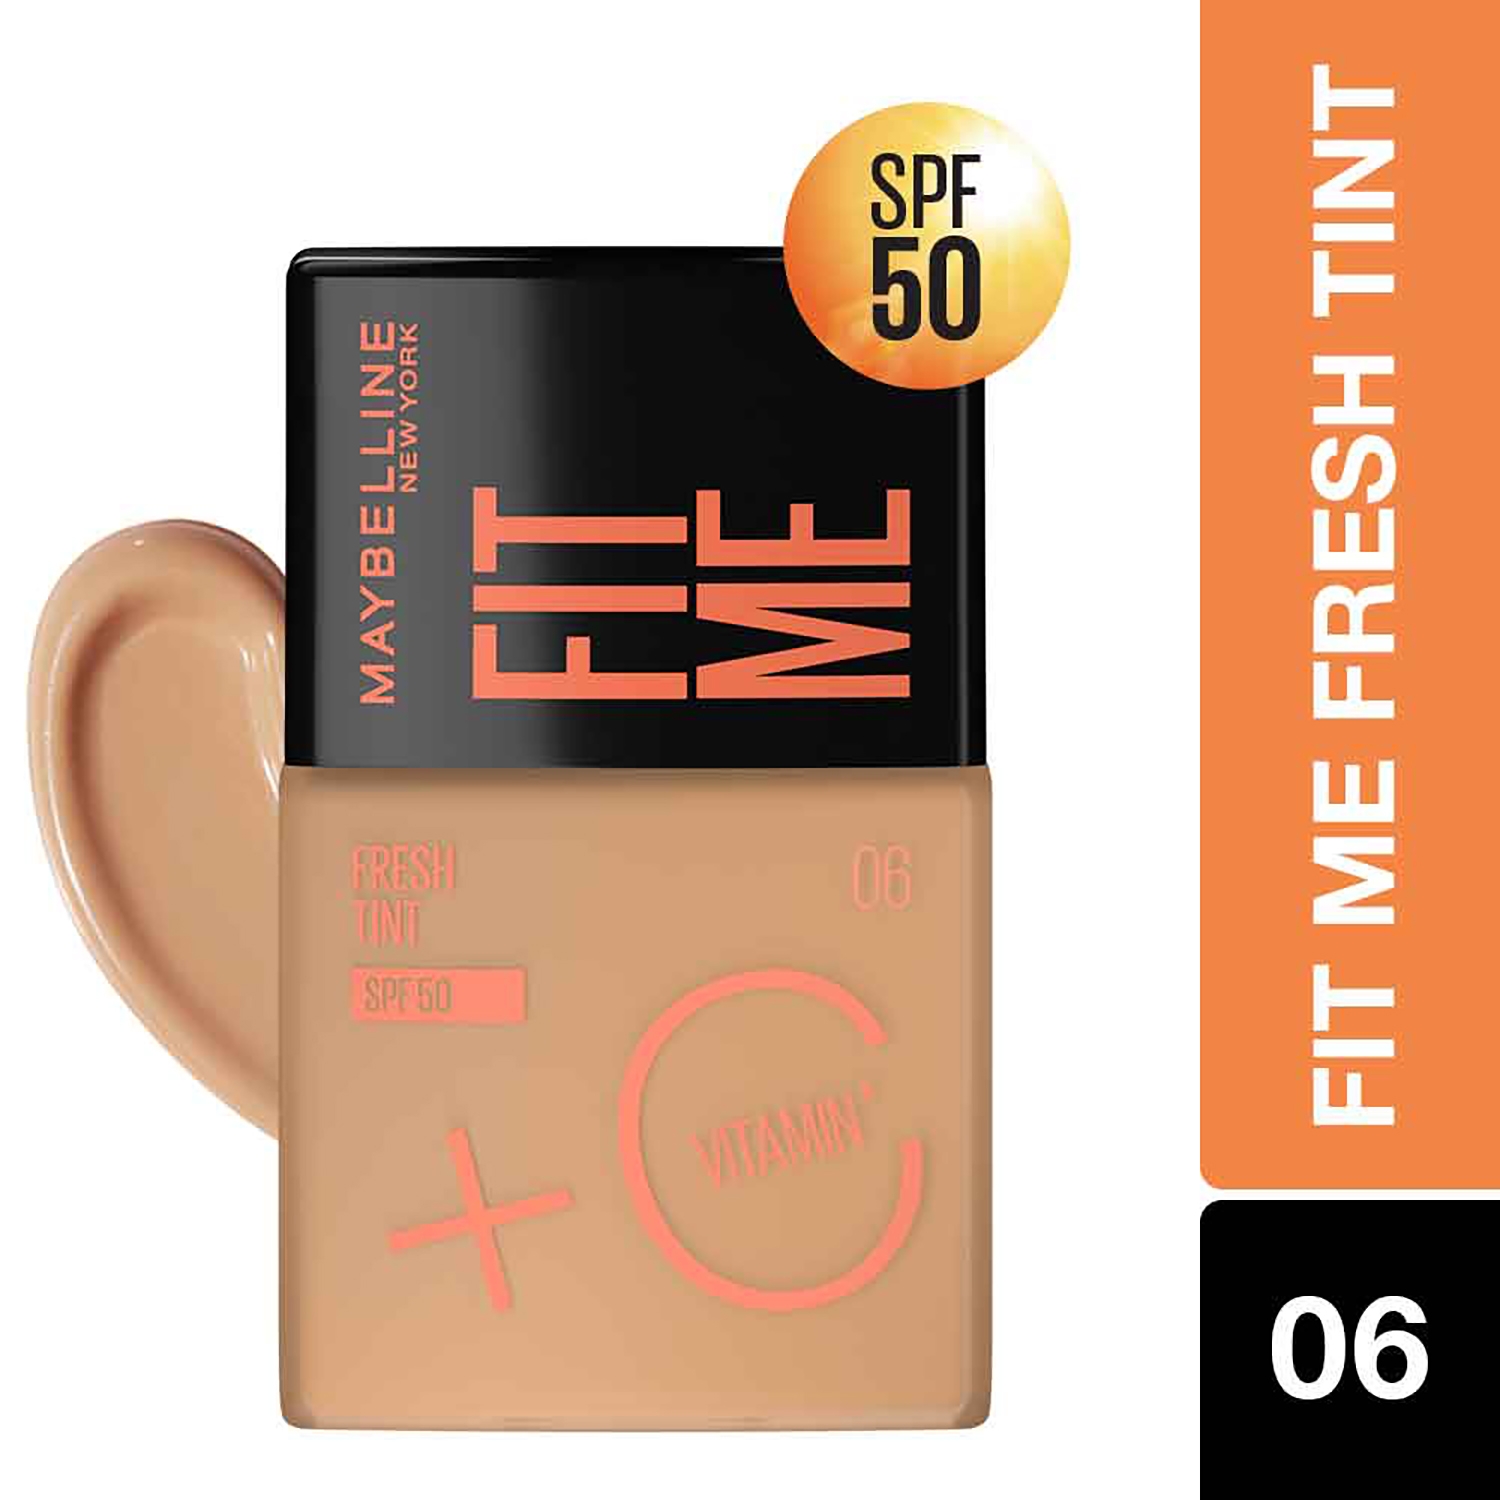 Maybelline New York | Maybelline New York Fit Me Fresh Tint With SPF 50 & Vitamin C - 06 Shade (30ml)